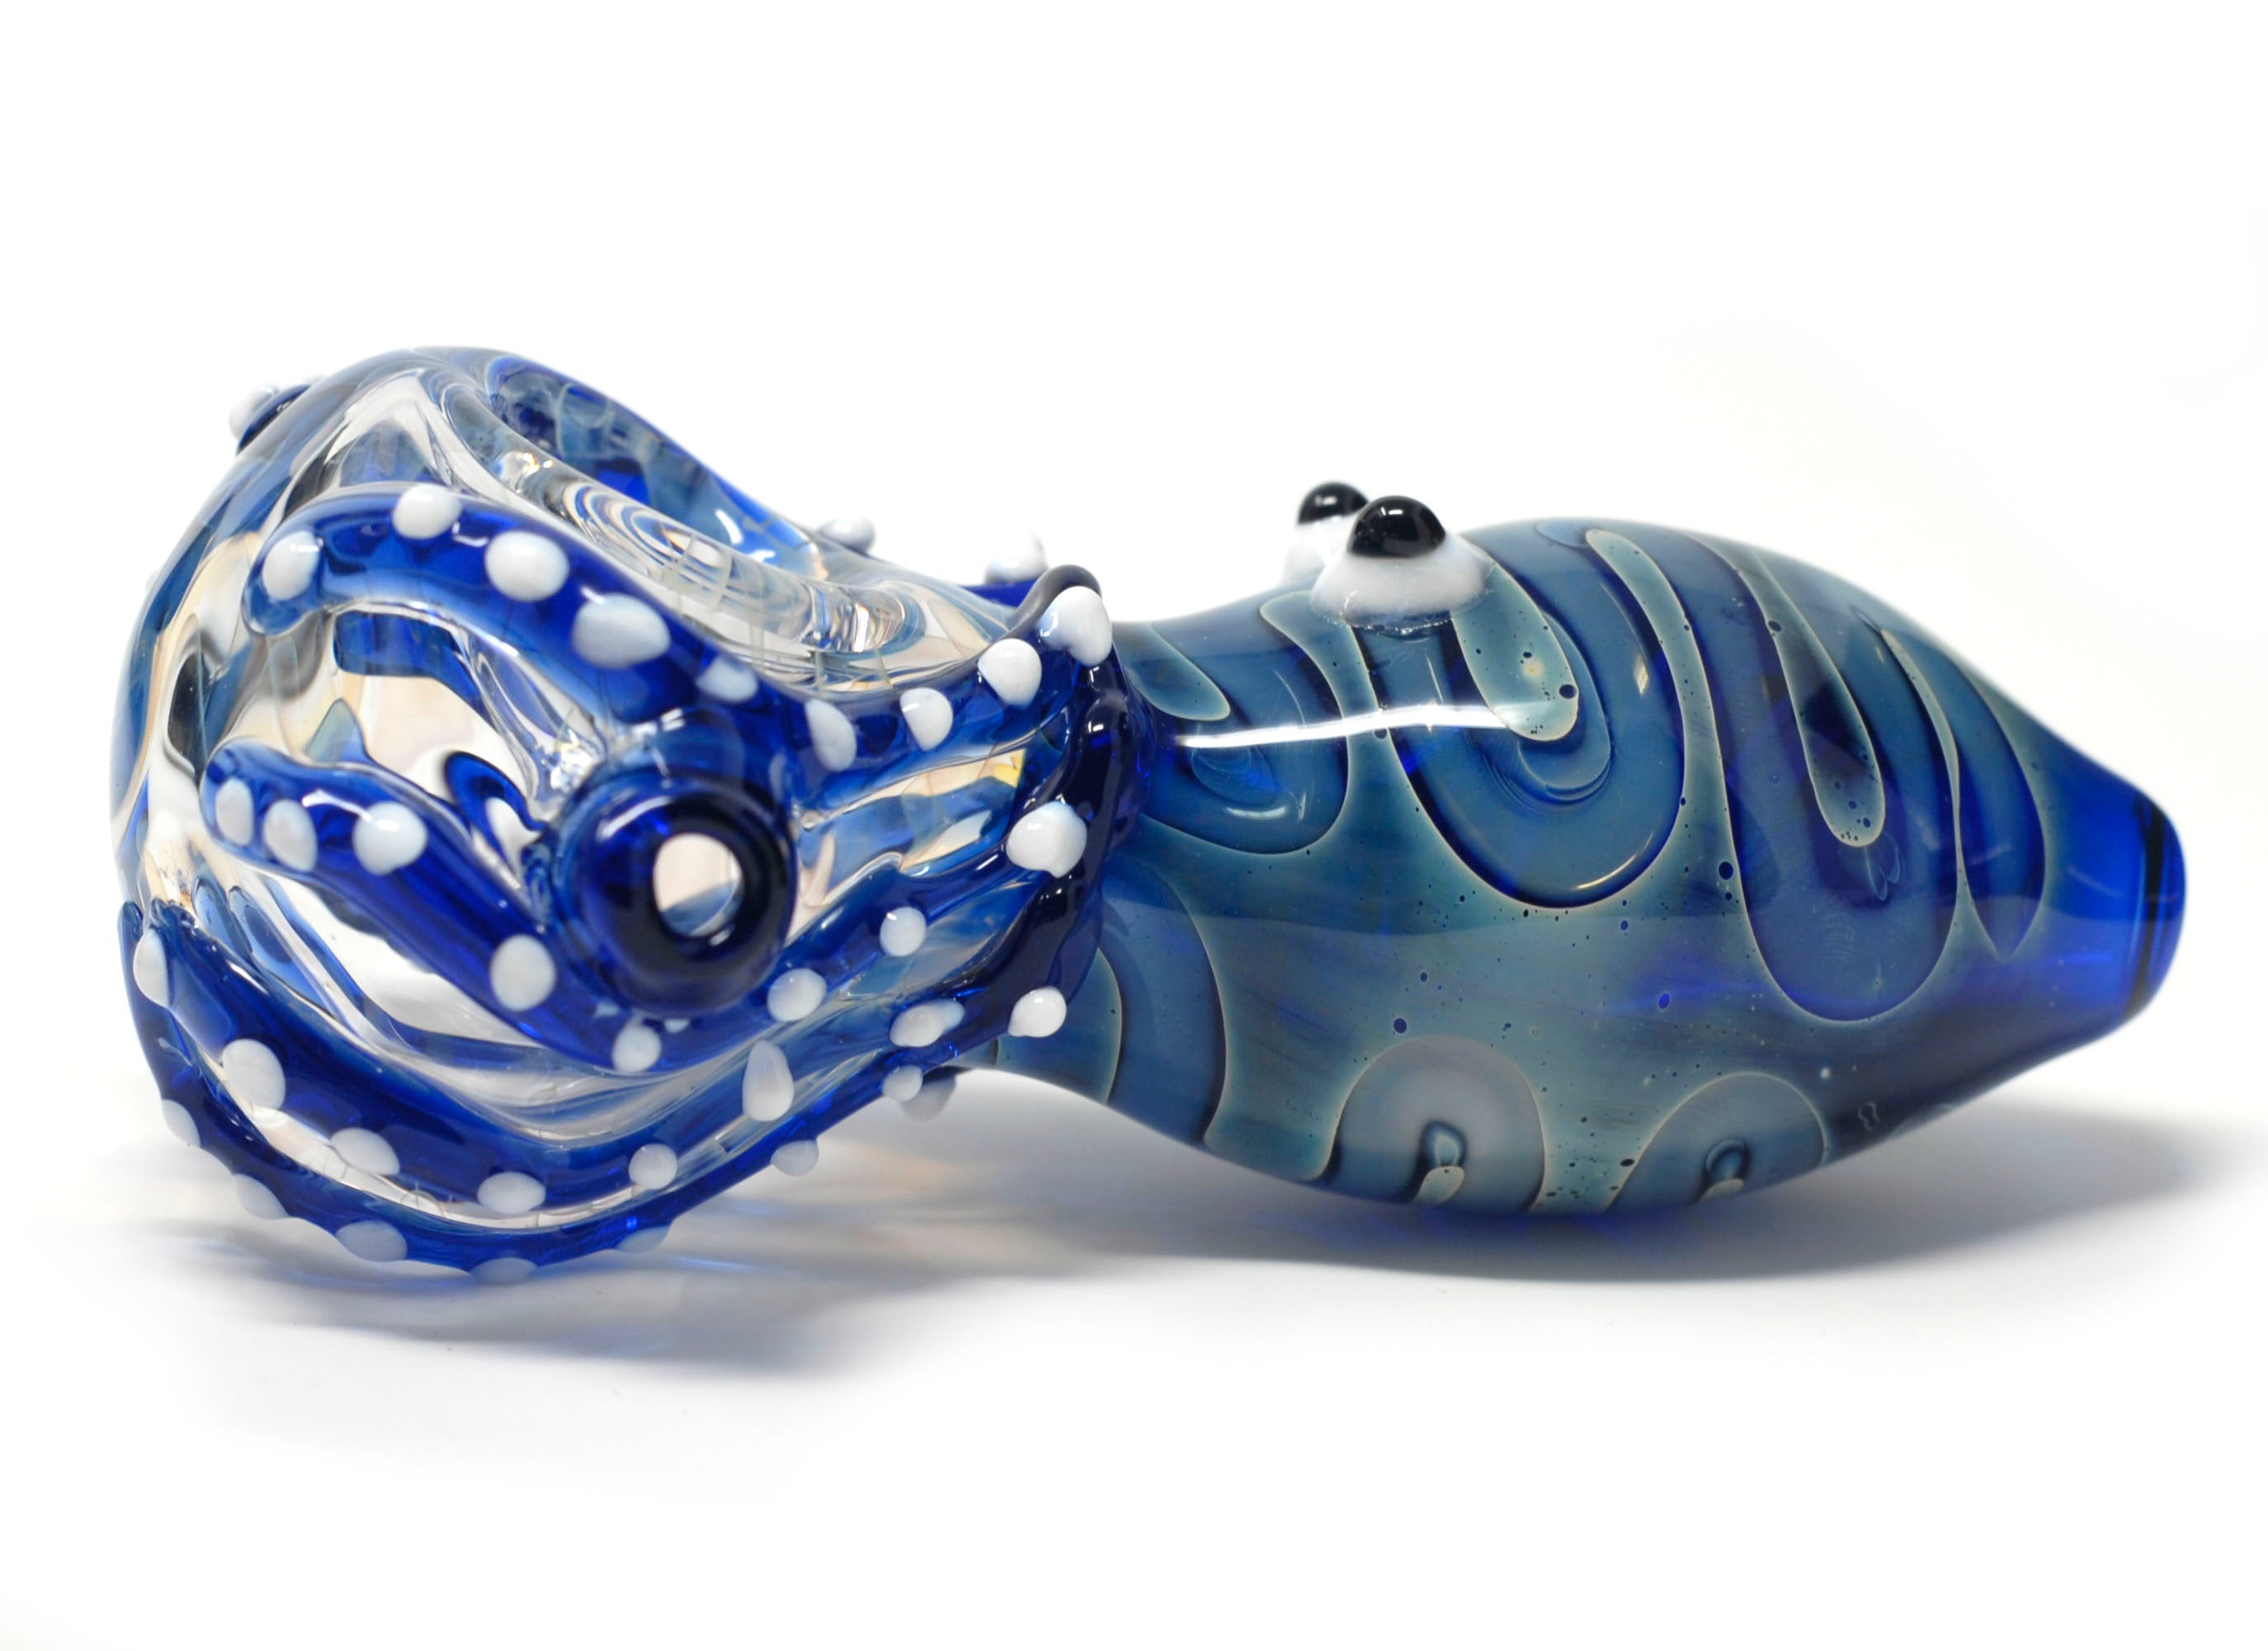 4.5 "  Squid glass hand pipe